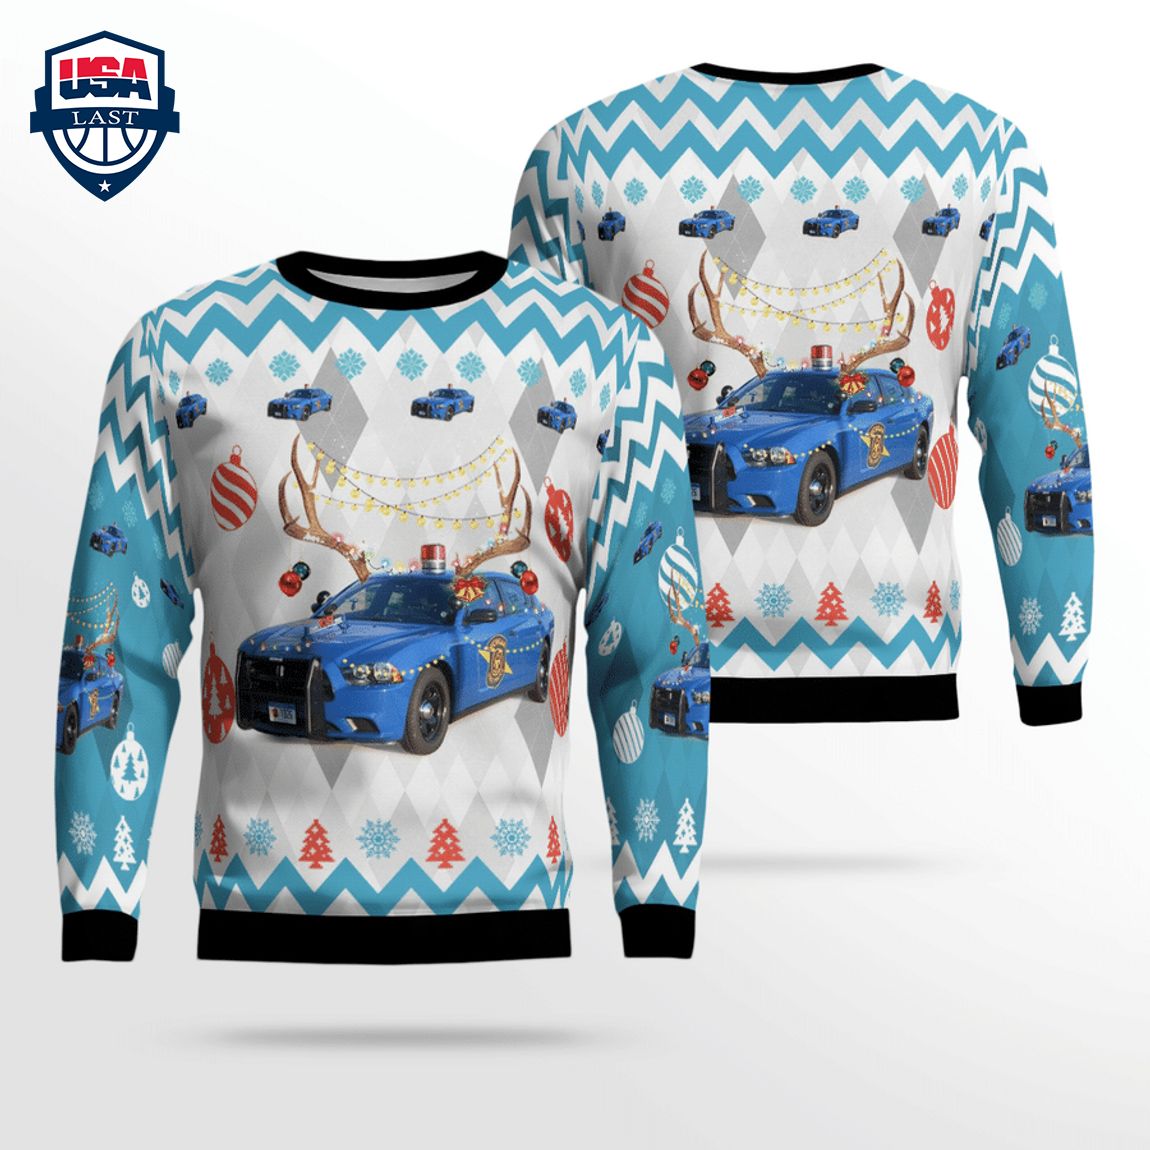 Michigan State Police Dodge Charger 3D Christmas Sweater - Good look mam